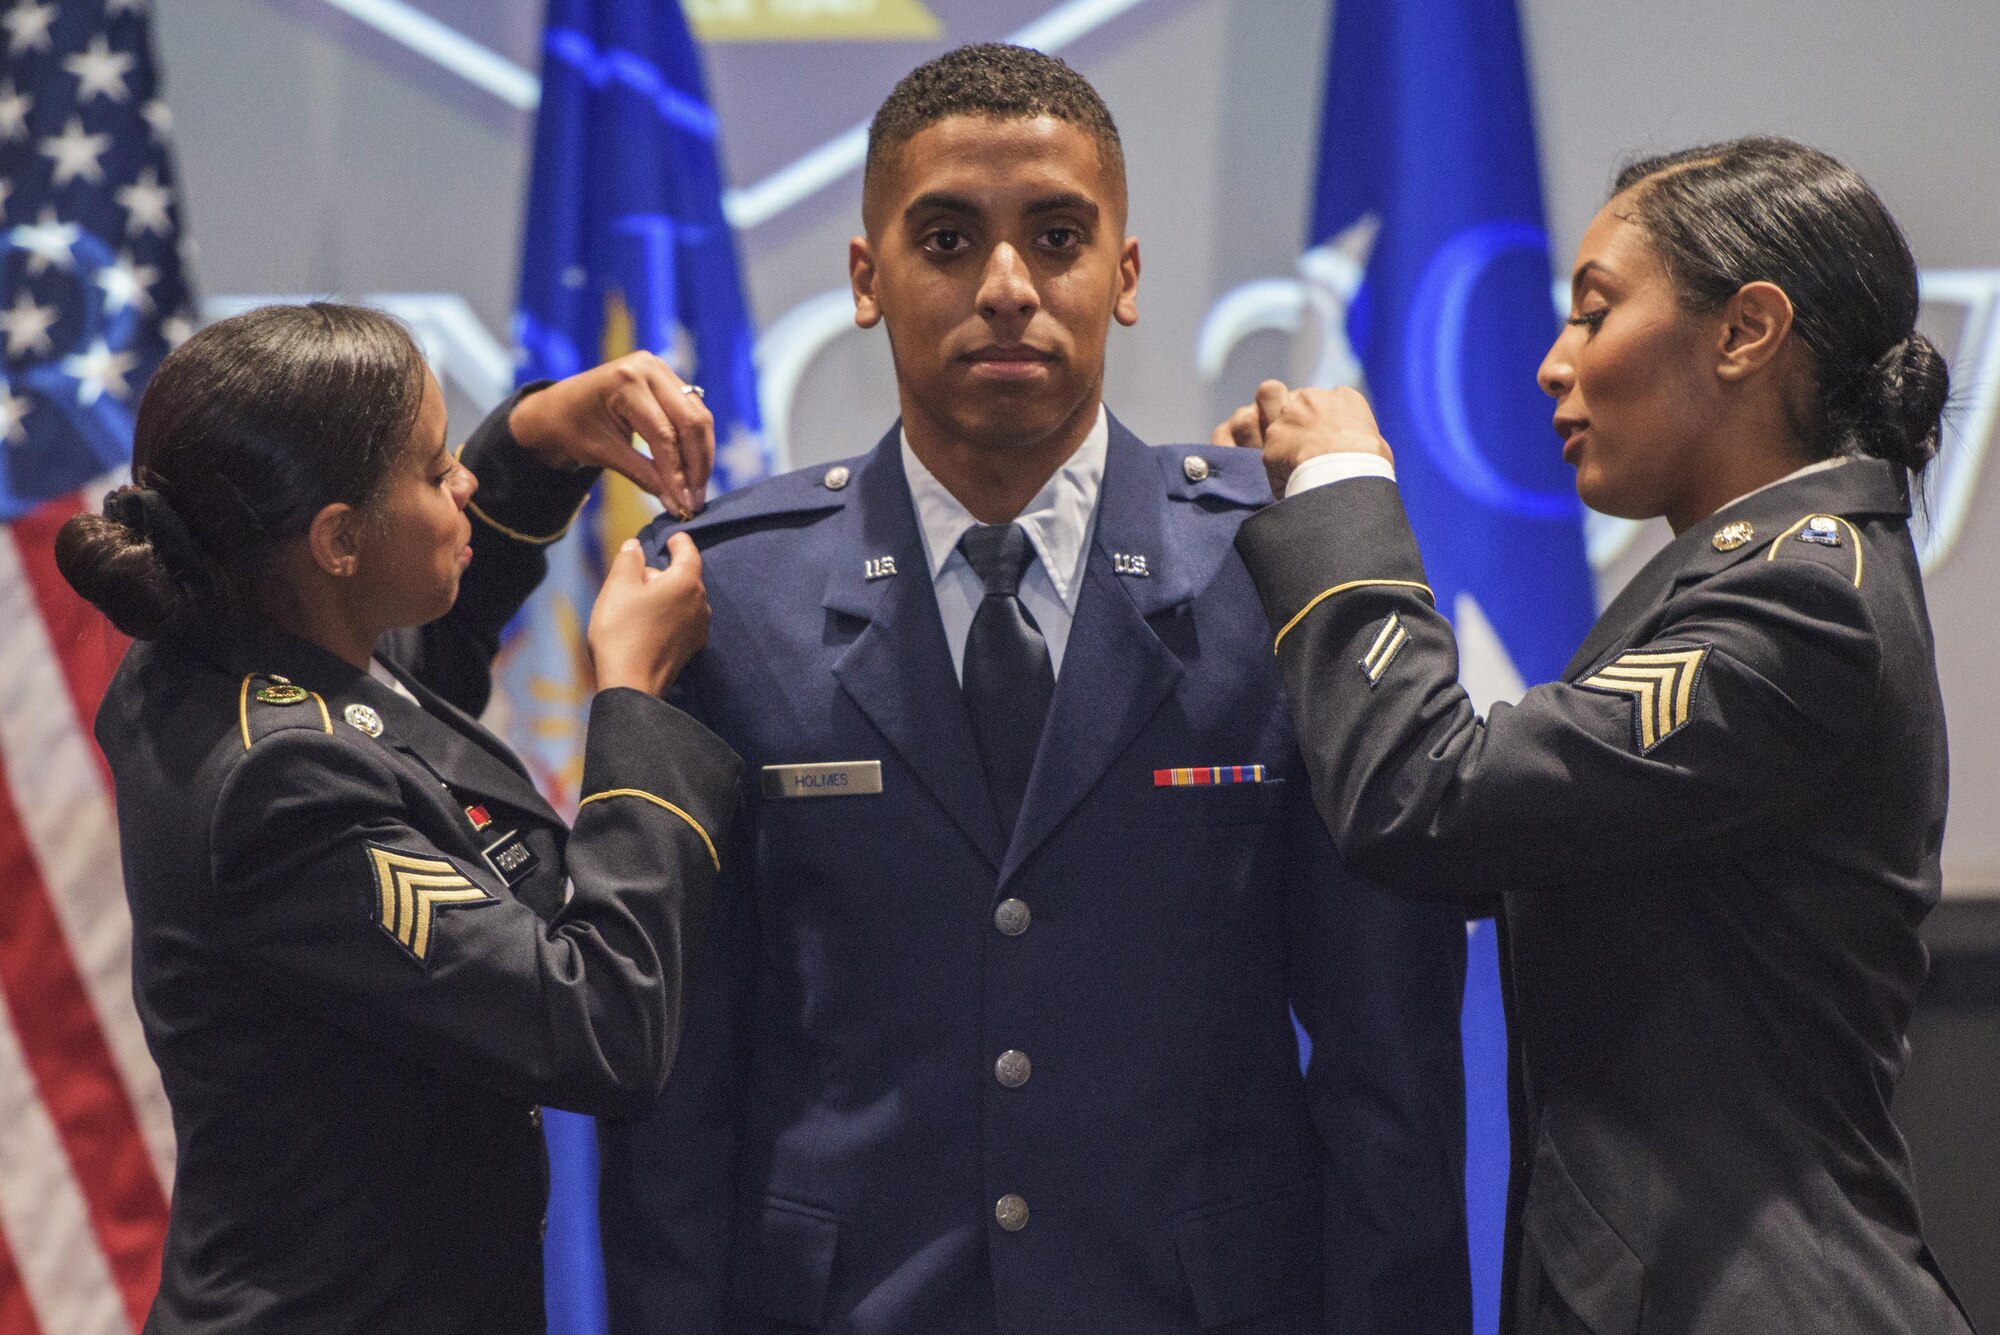 U.S. Air Force 2nd Lt. Jahvon Holmes, University of Texas San Antonio graduate, has his rank pinned on by his sisters May 12, 2017, at UTSA in San Antonio, Texas. Holmes was one of the 17 graduates in attendance, and is the first member of his family to commission in the Air Force who will begin his career in undergraduate pilot training. (U.S. Air Force photo by Senior Airman Stormy Archer)